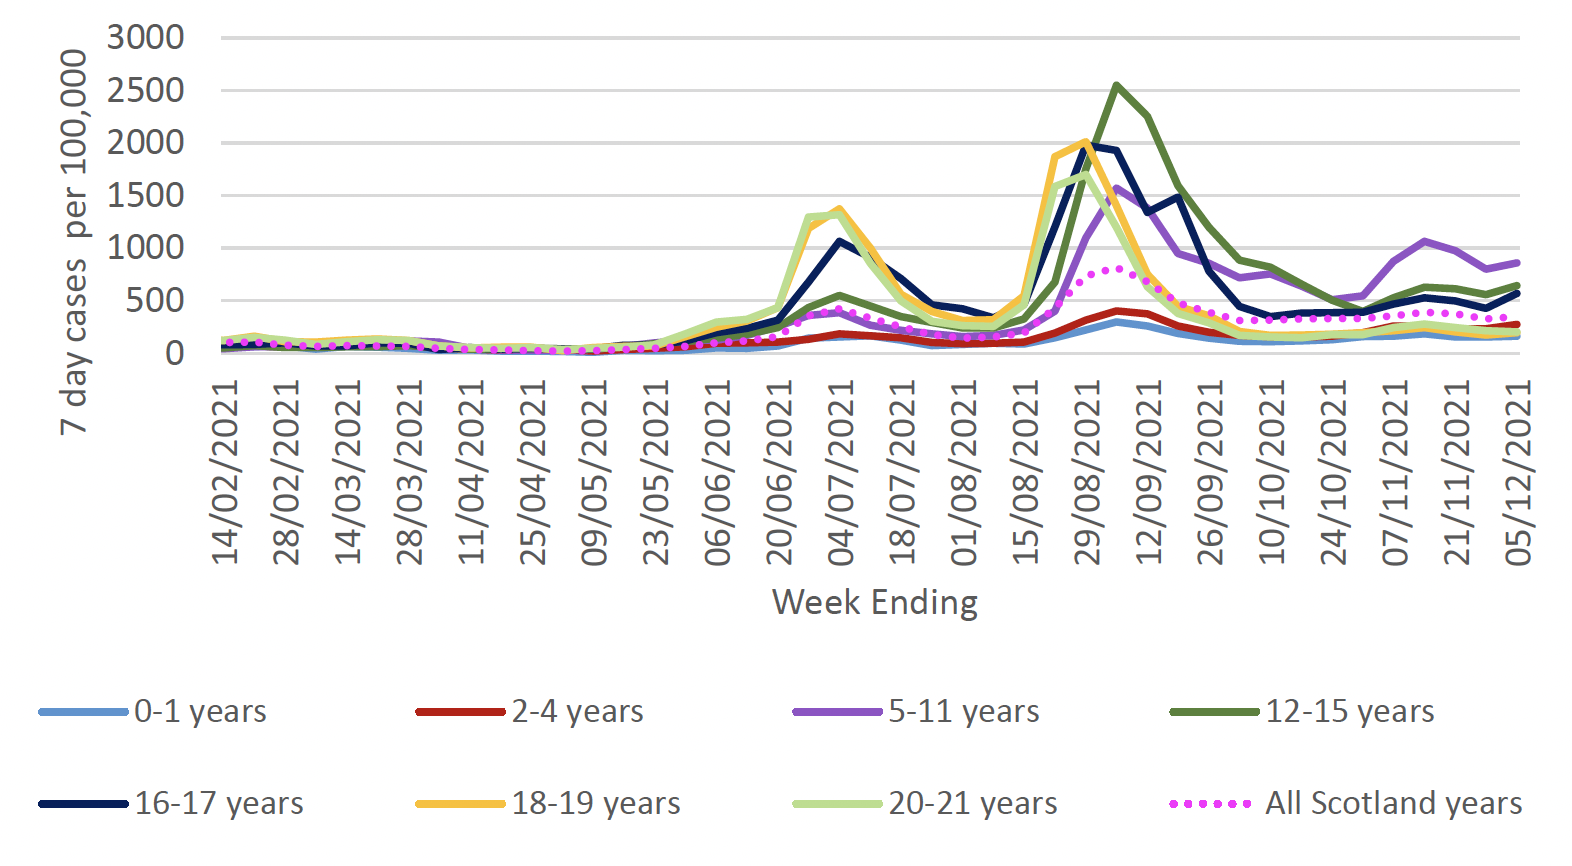 This figure shows the 7-day case rate of school pupils and younger adults of under 22 years of age who tested positive for Covid-19, grouped in seven age groups, since 14 February 2021. Markers also show all Scotland case rate for comparison.
The rates for all age groups have varied over time. Case rates remained relatively low from mid-February to May 2021. They then started to increase in May and peaked in early July, with the highest case rate among 18-19 year olds. The rates decreased across all age groups in late July. Case rates then started to rise at the beginning of August 2021, reaching a peak in early September. These then started to decrease and by early October most age bands stabilised except for 5-11 and 12-15 year olds which continued to decrease. While case rates in children and young adults have remained relatively stable since then, 7 day cases per 100,000 have been above Scotland’s case rates in those aged 5-11, 12-15 and 16-17. The trend for 5-11 year olds is showing more variation for this period. 
